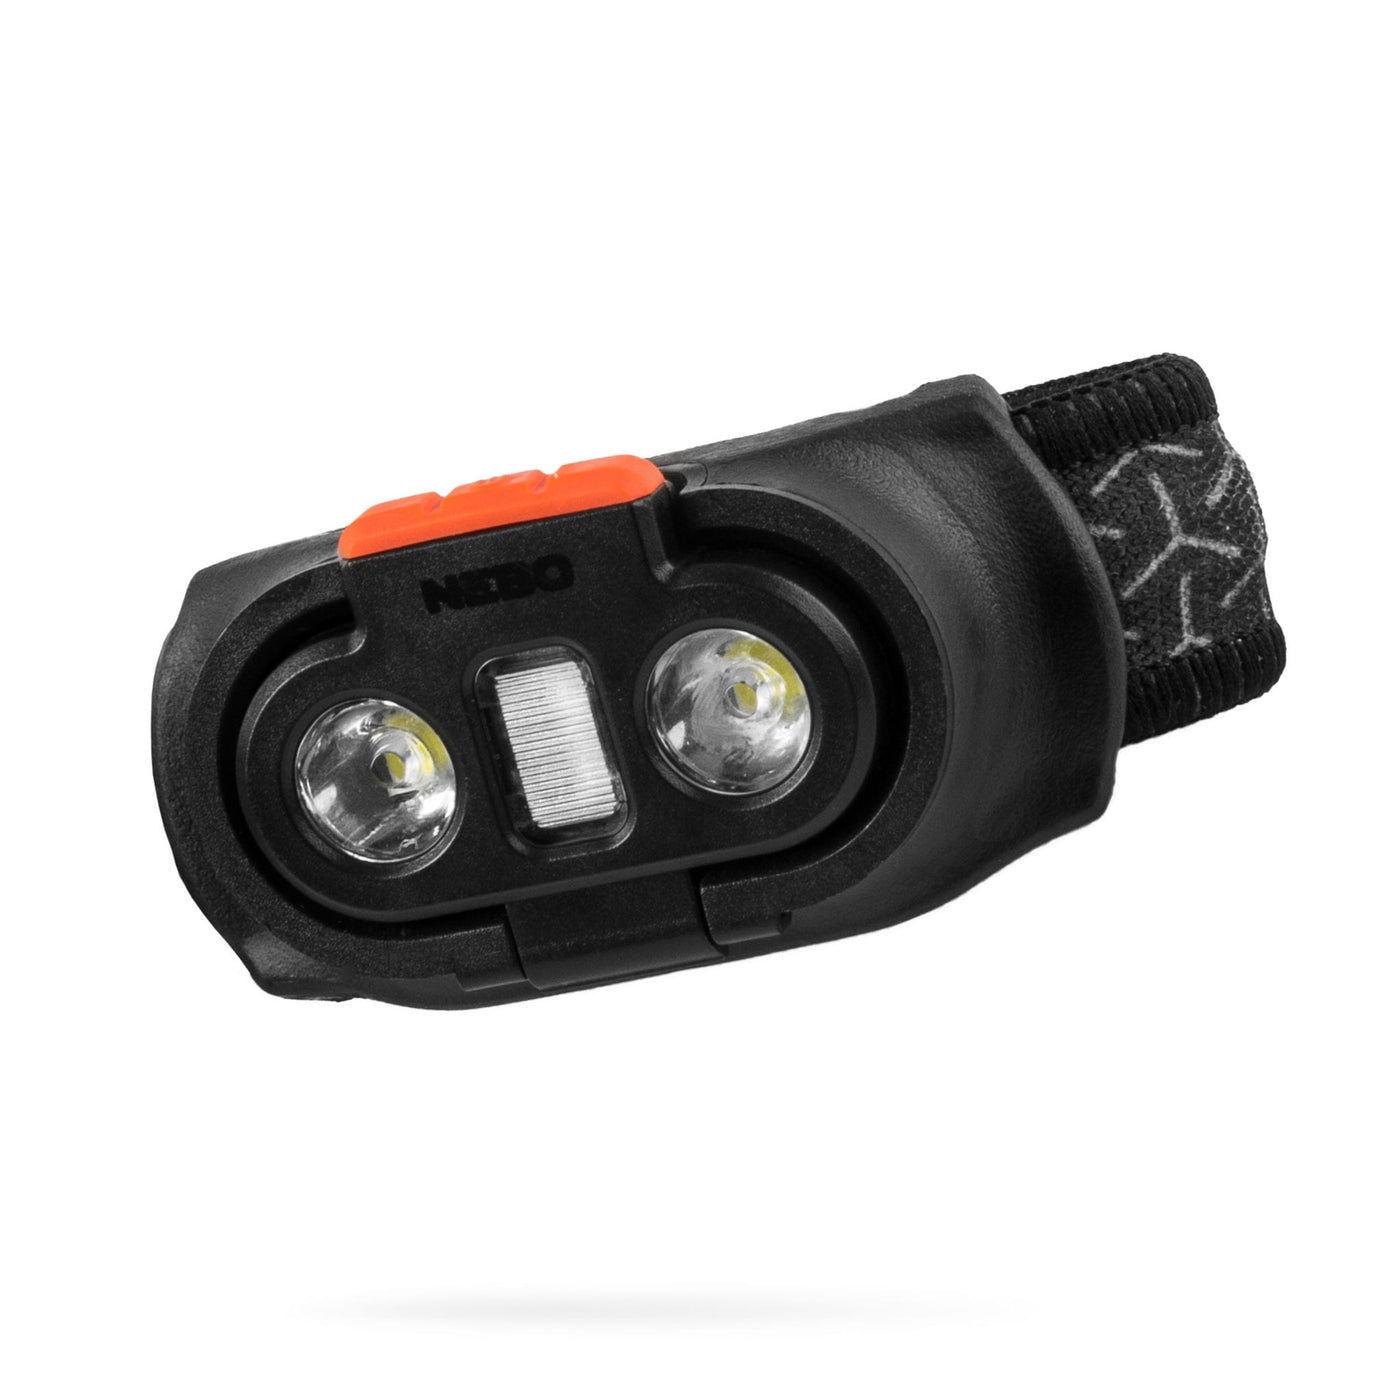 At Nebo Tools, we continually innovate so that we can offer the highest quality LED lighting products at the best price. The Einstein™ 1000 by NEBO is a low-profile, compact 1,000 lumen headtorch with 5 light modes featuring flex power. Use the included rechargeable battery or 2 batteries. Completely water resistant